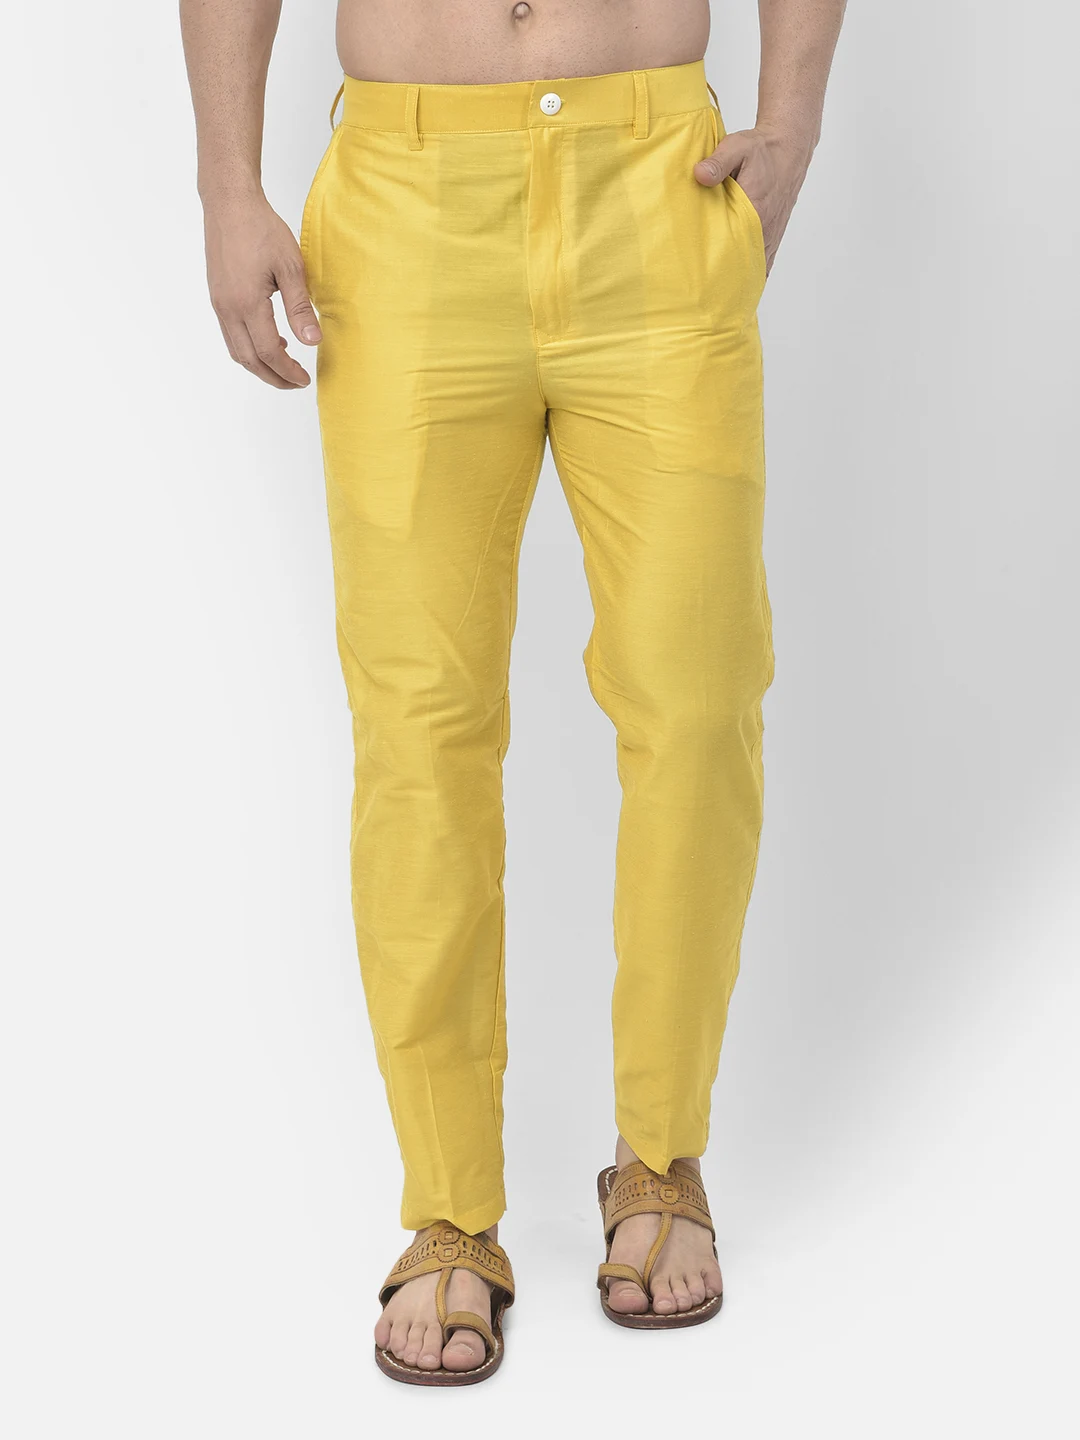 U.S. POLO ASSN. Regular Fit Men Yellow Trousers - Buy U.S. POLO ASSN.  Regular Fit Men Yellow Trousers Online at Best Prices in India |  Flipkart.com